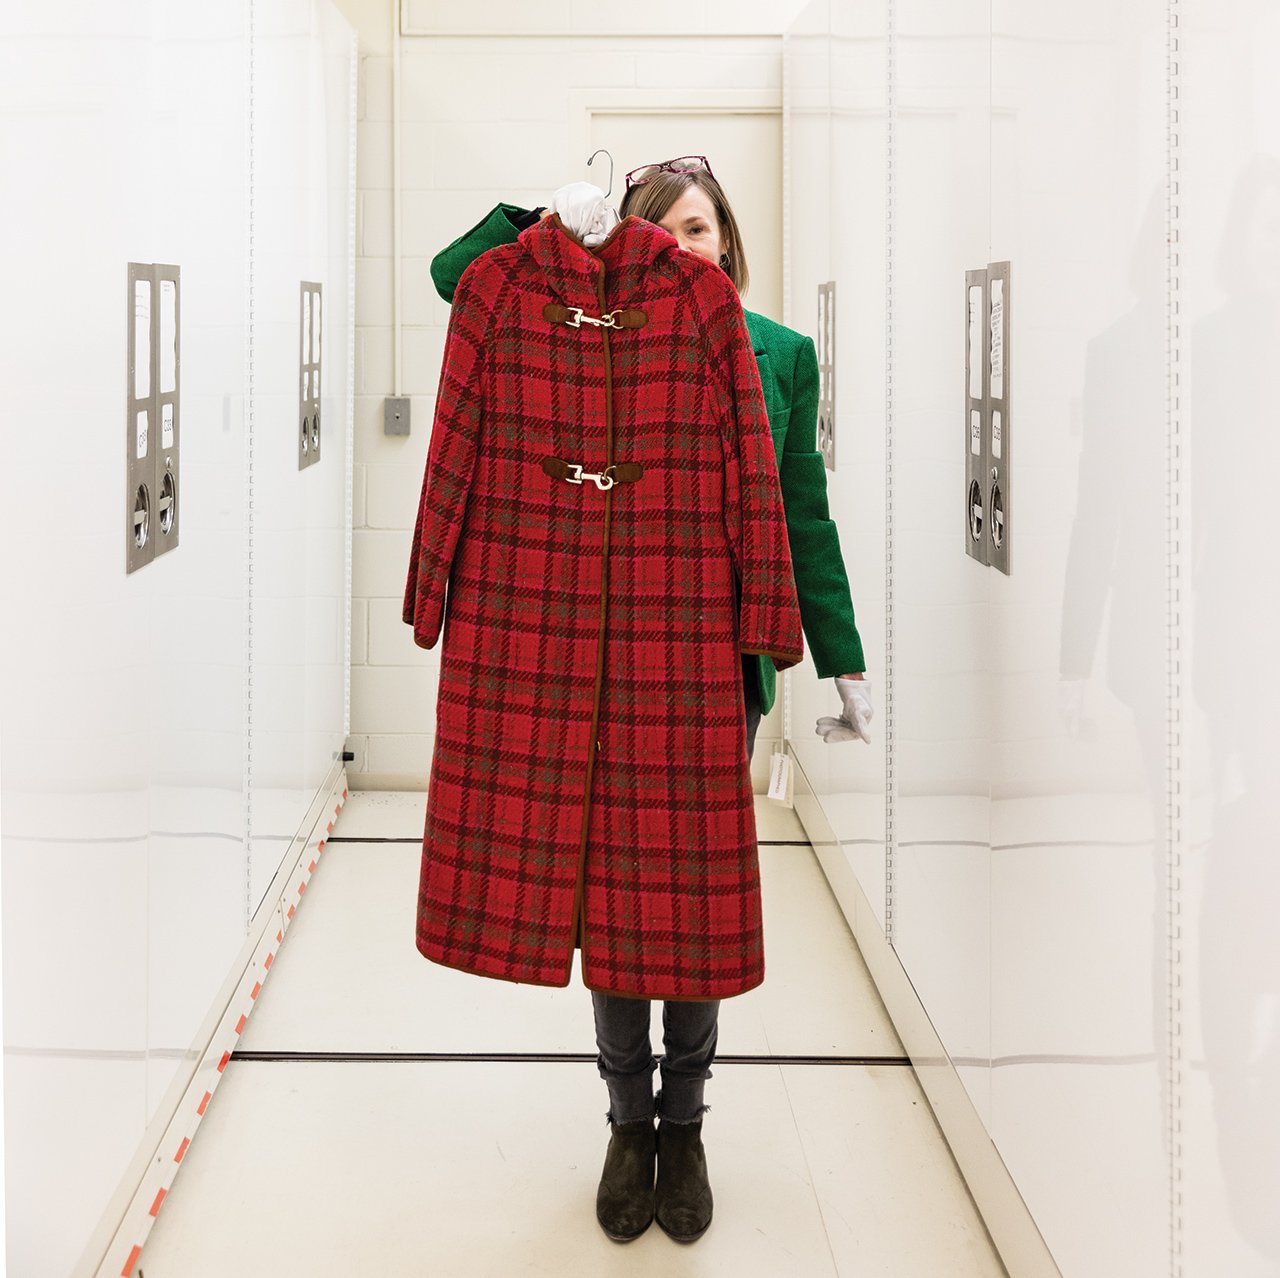 Jean McElvain holding up a plaid coat from the Goldstein Collection